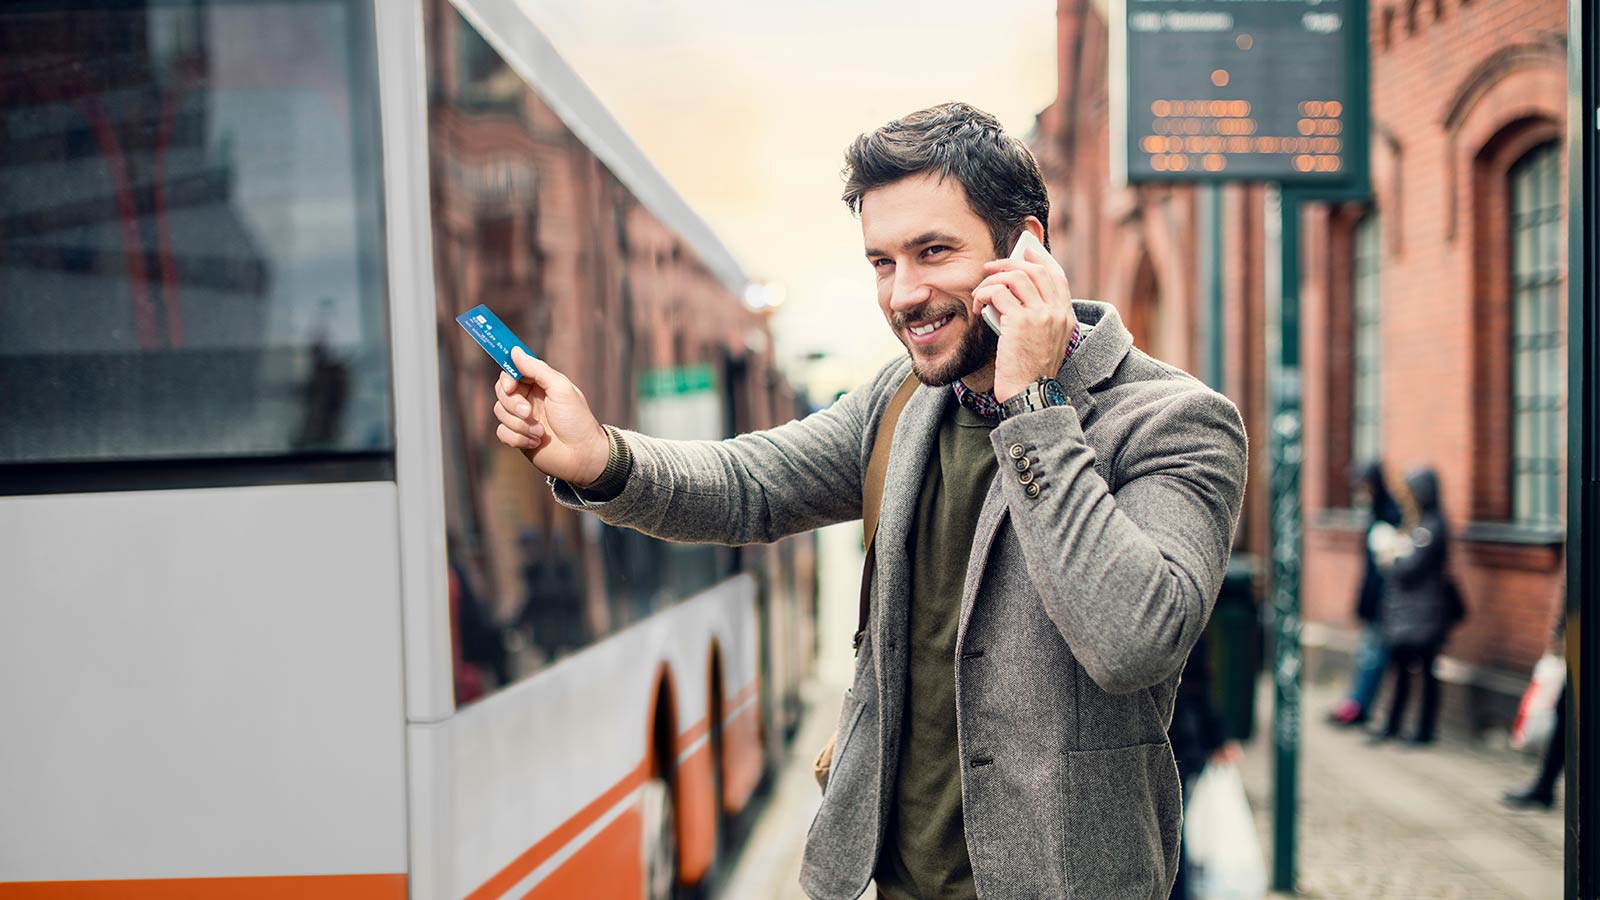 Man holding contactless card on the phone